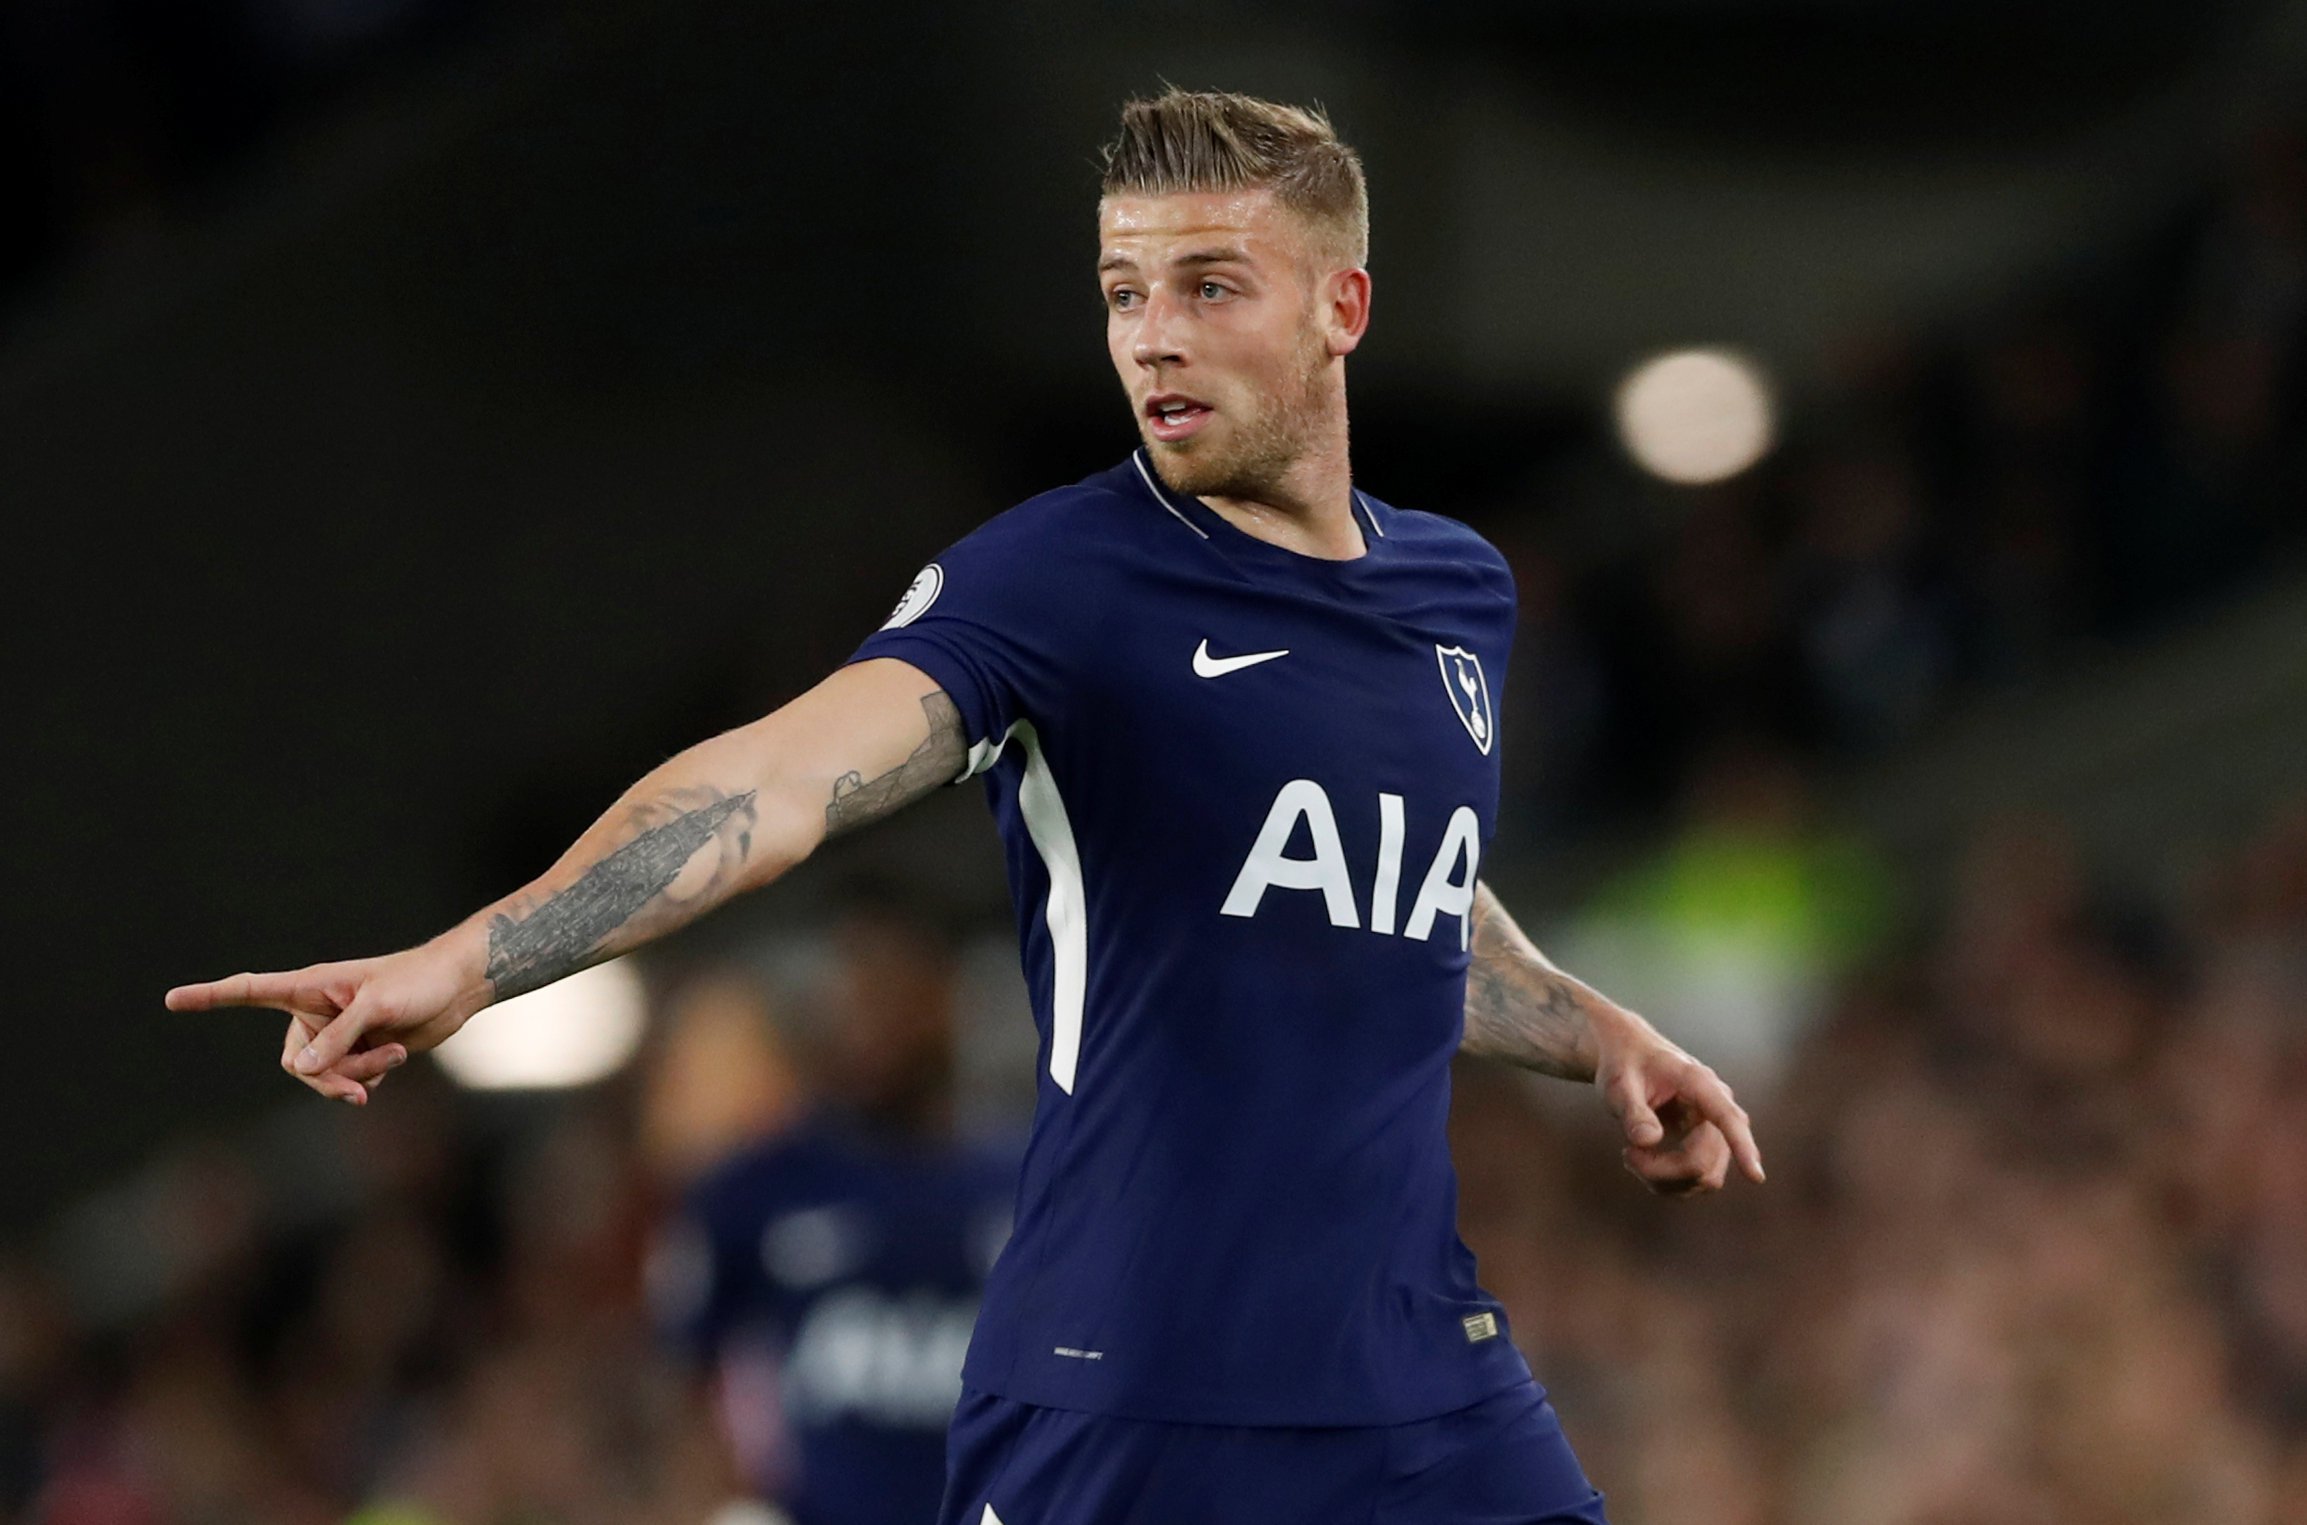 Spurs demand transfer fee in excess of £55million for Manchester United target Toby Alderweireld